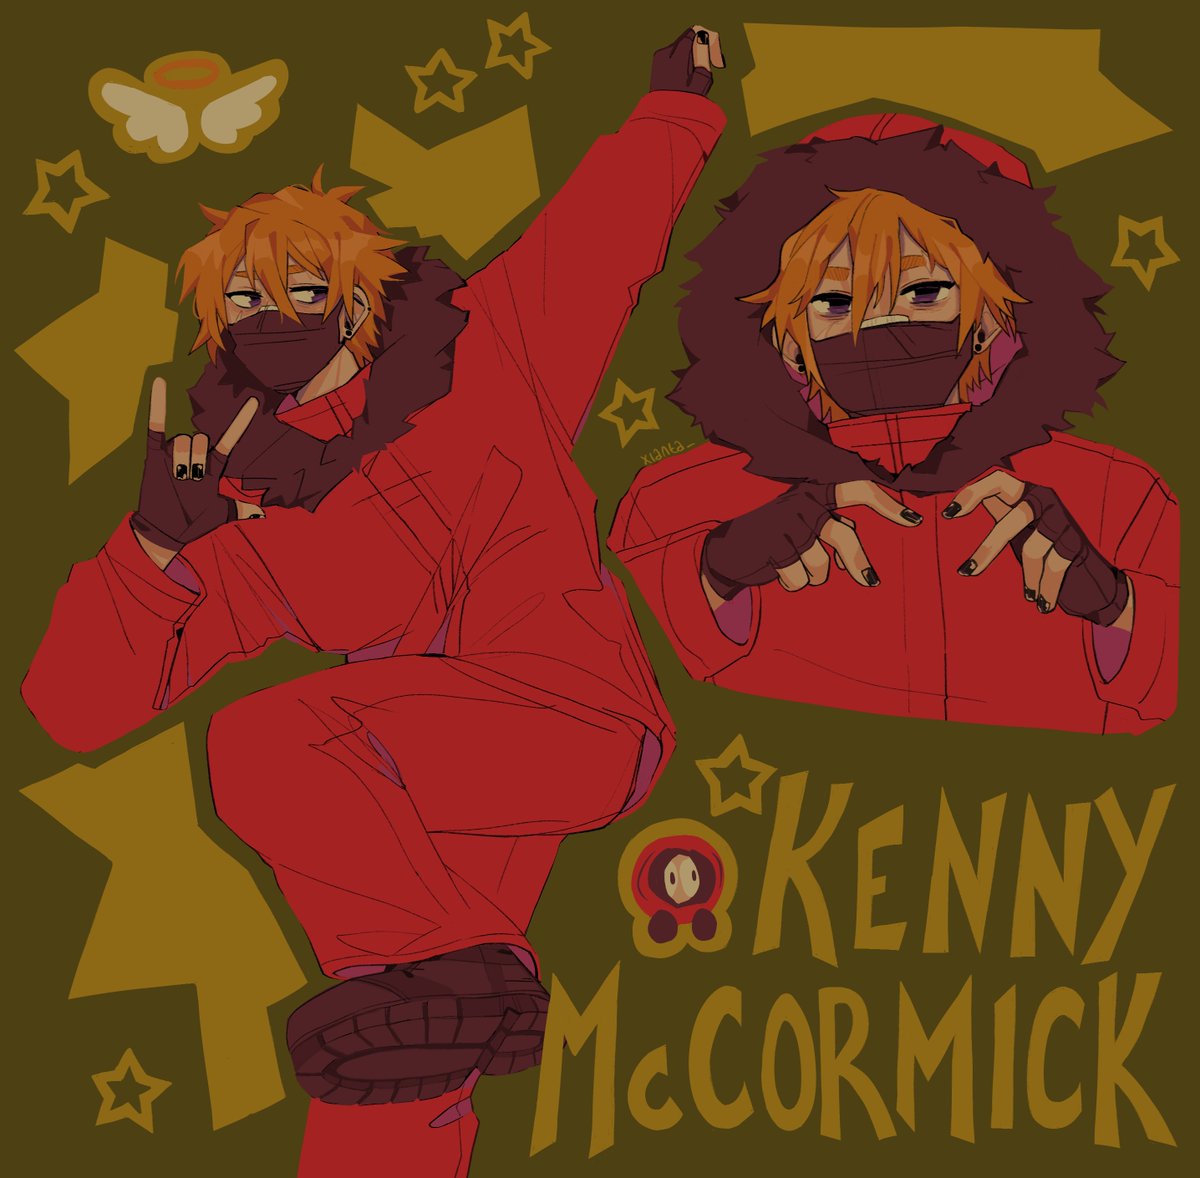 「kenneth!#kennymccormick #southpark 」|Xia 🎗 10k DTIYSのイラスト